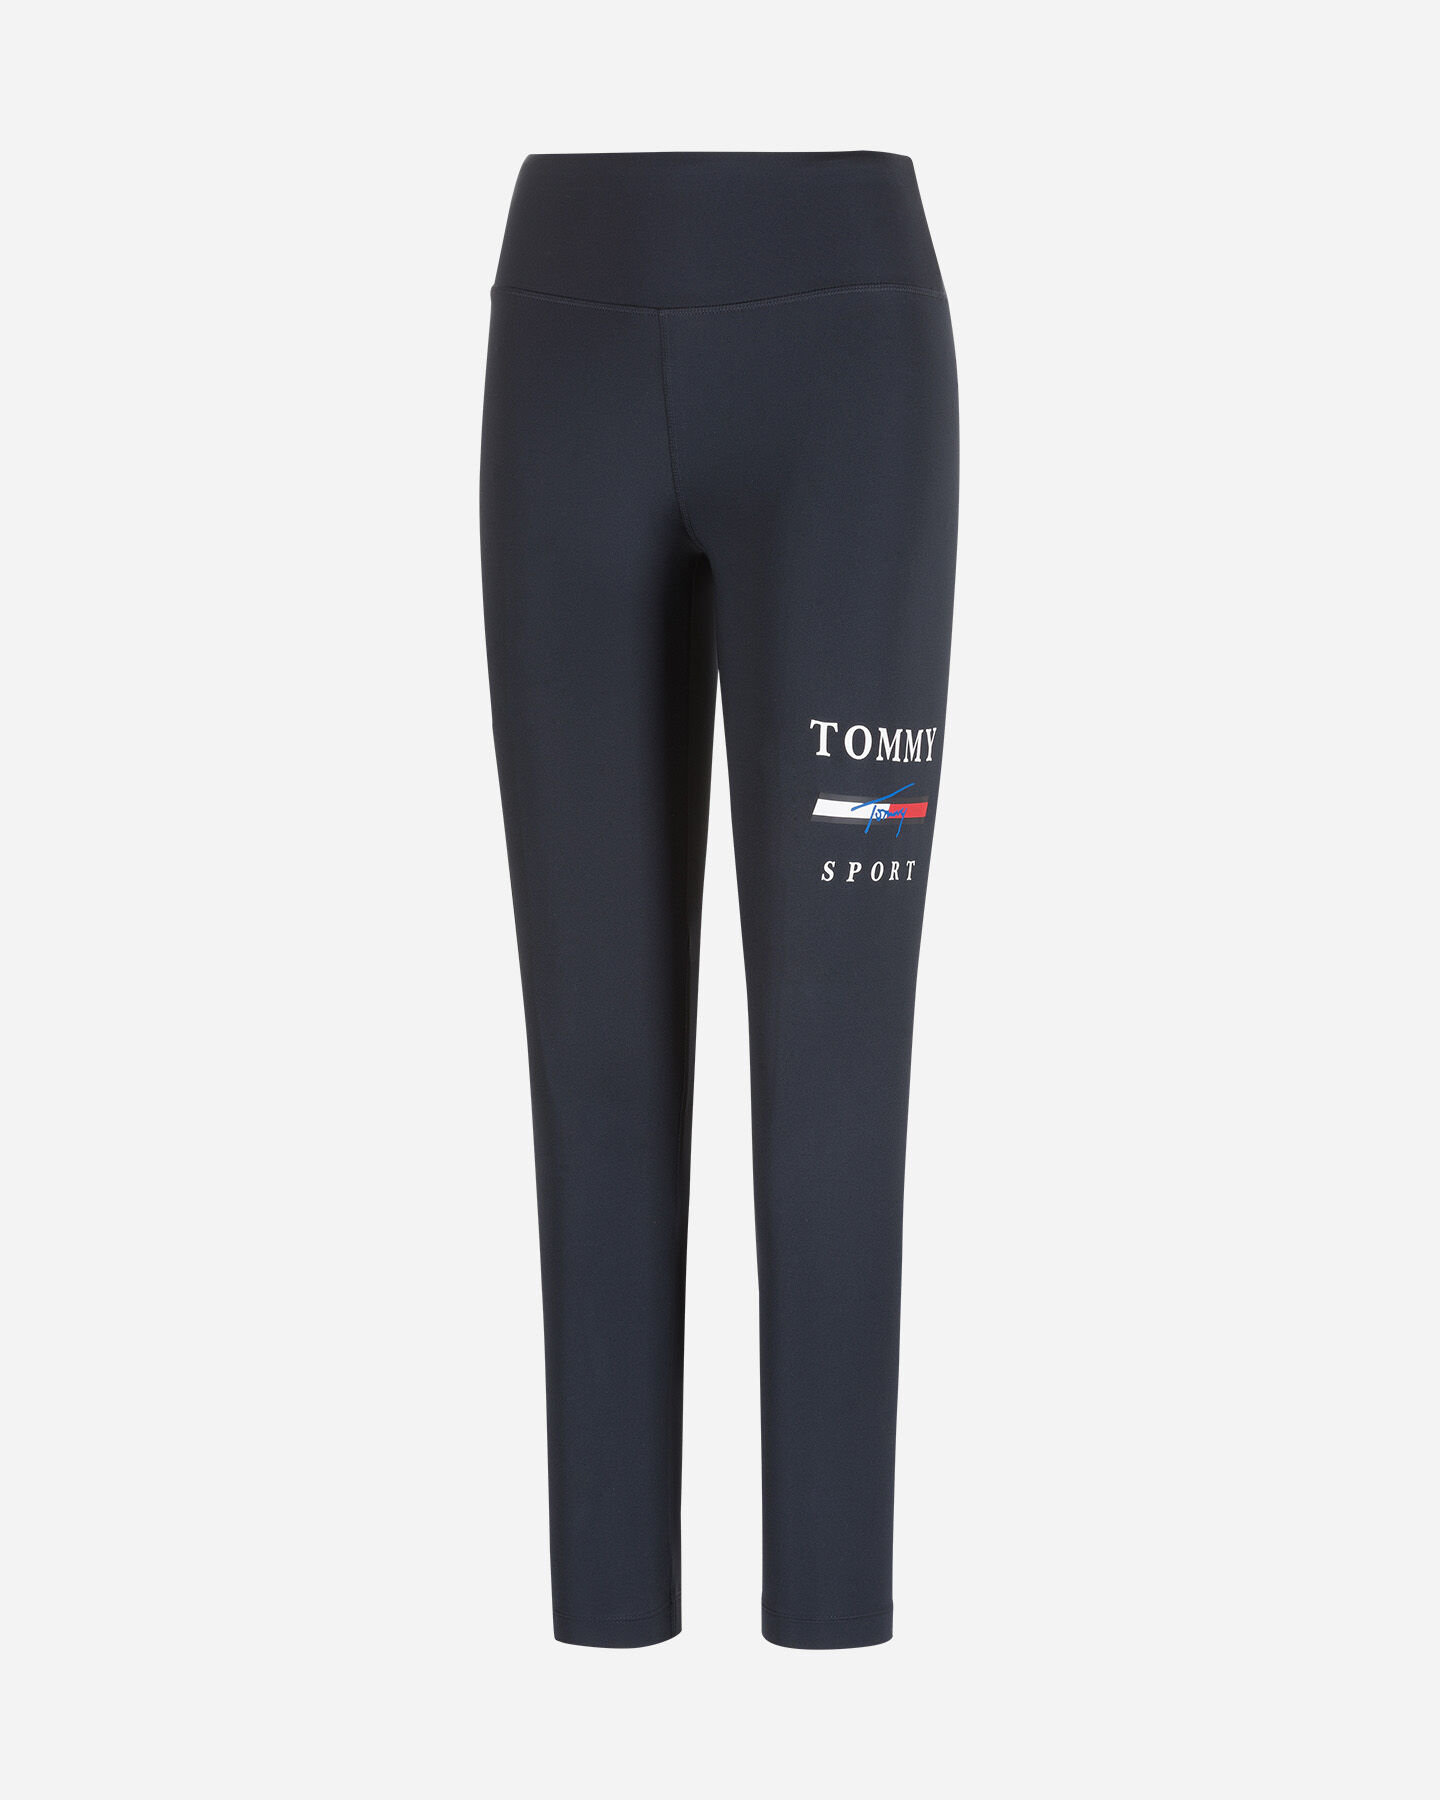  Leggings TOMMY HILFIGER GRAPHIC FLAG W S4082555|DW5|XS scatto 0